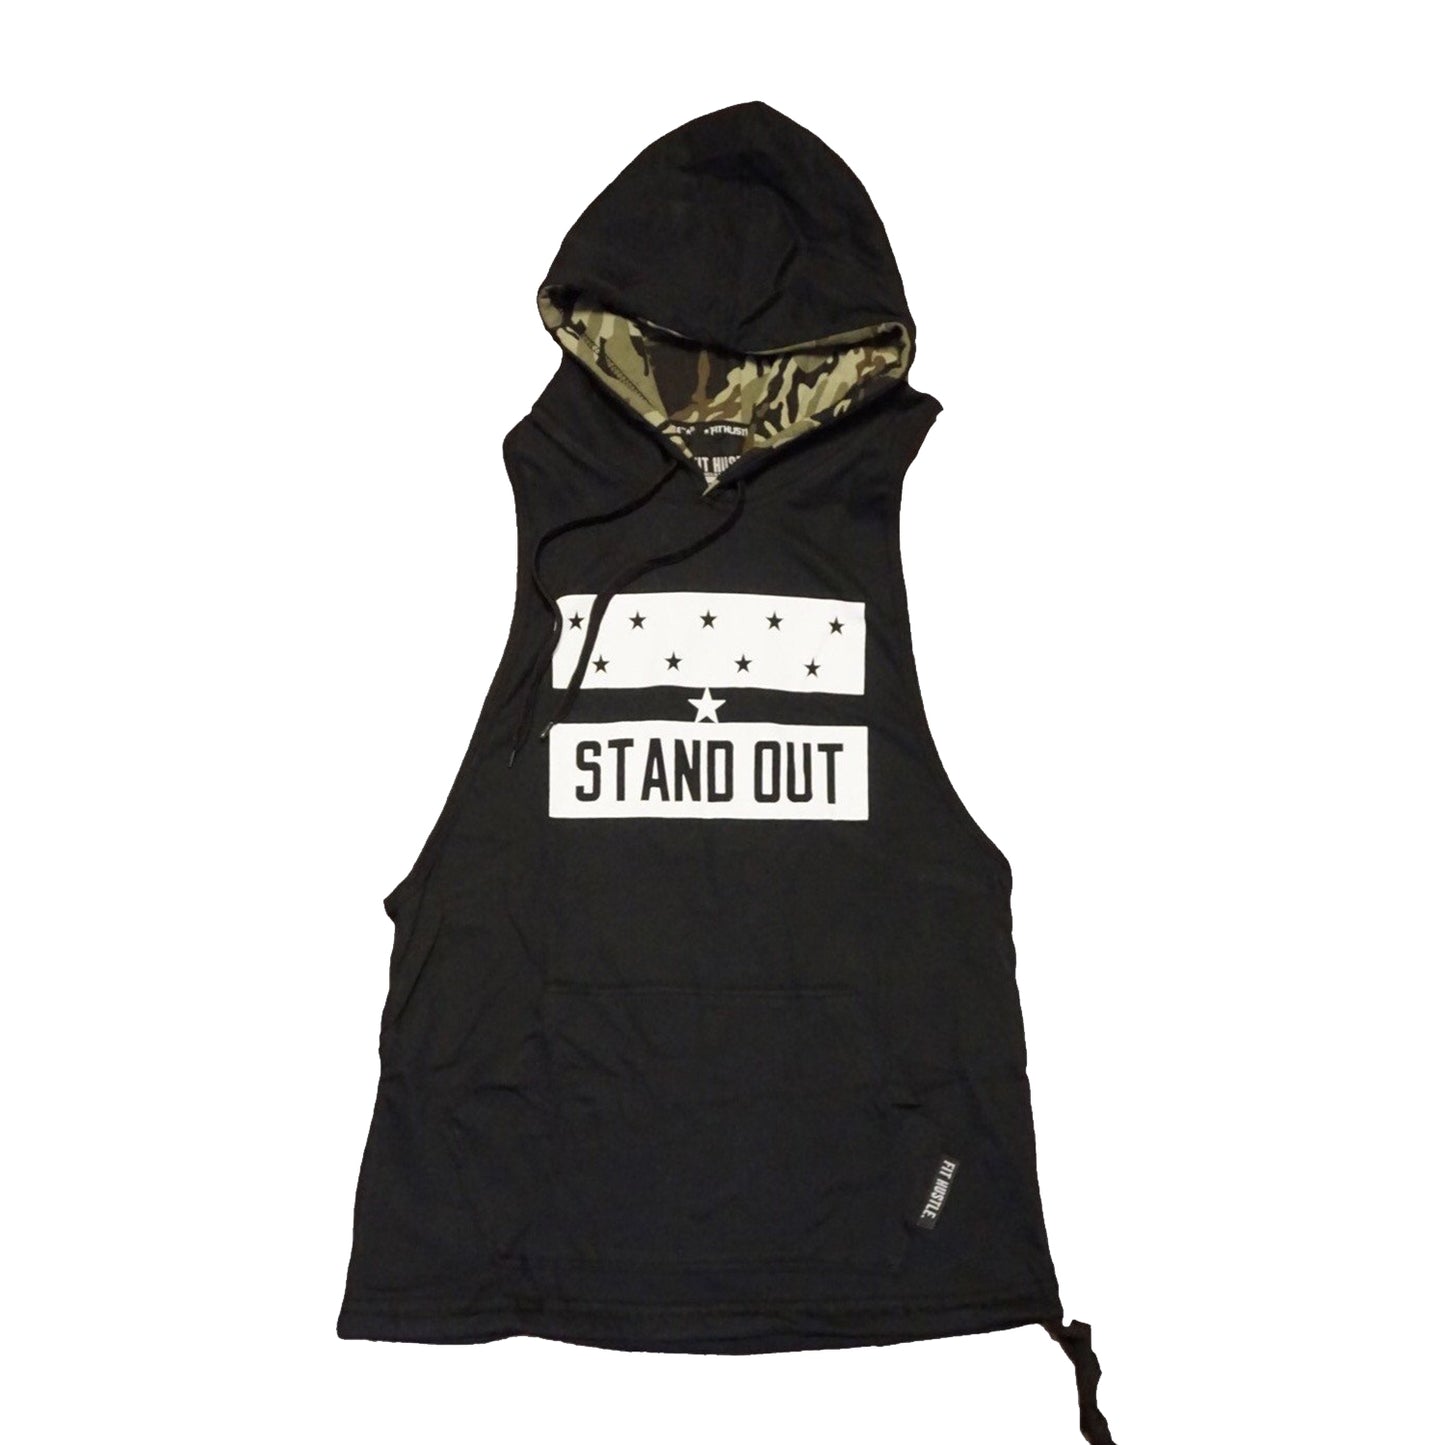 Green Camo "Stand Out" Stringer Hoodie 2.0